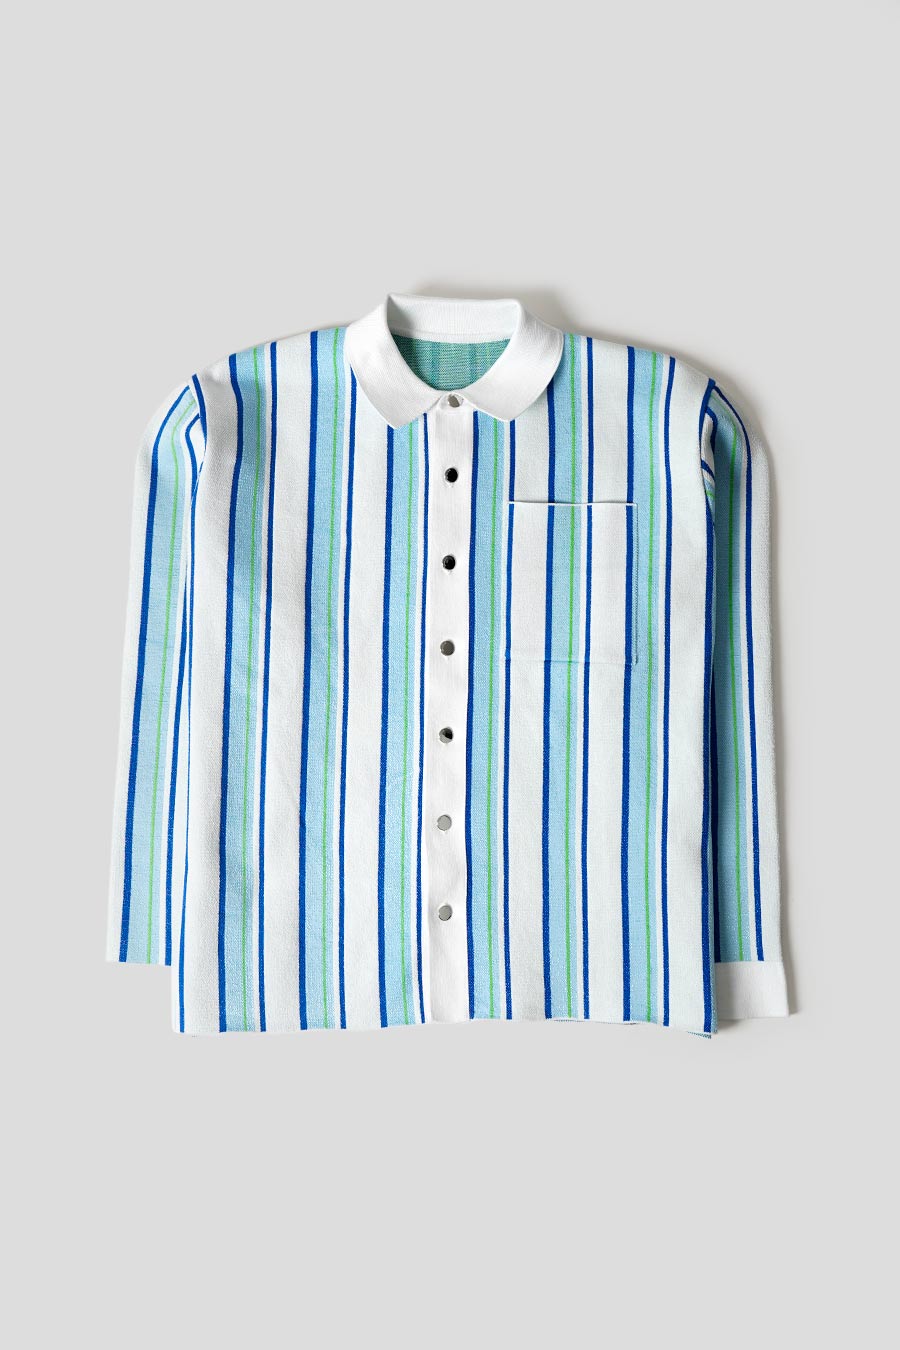 Jacquemus - WHITE AND BLUE POLO SHIRT - LE LABO STORE